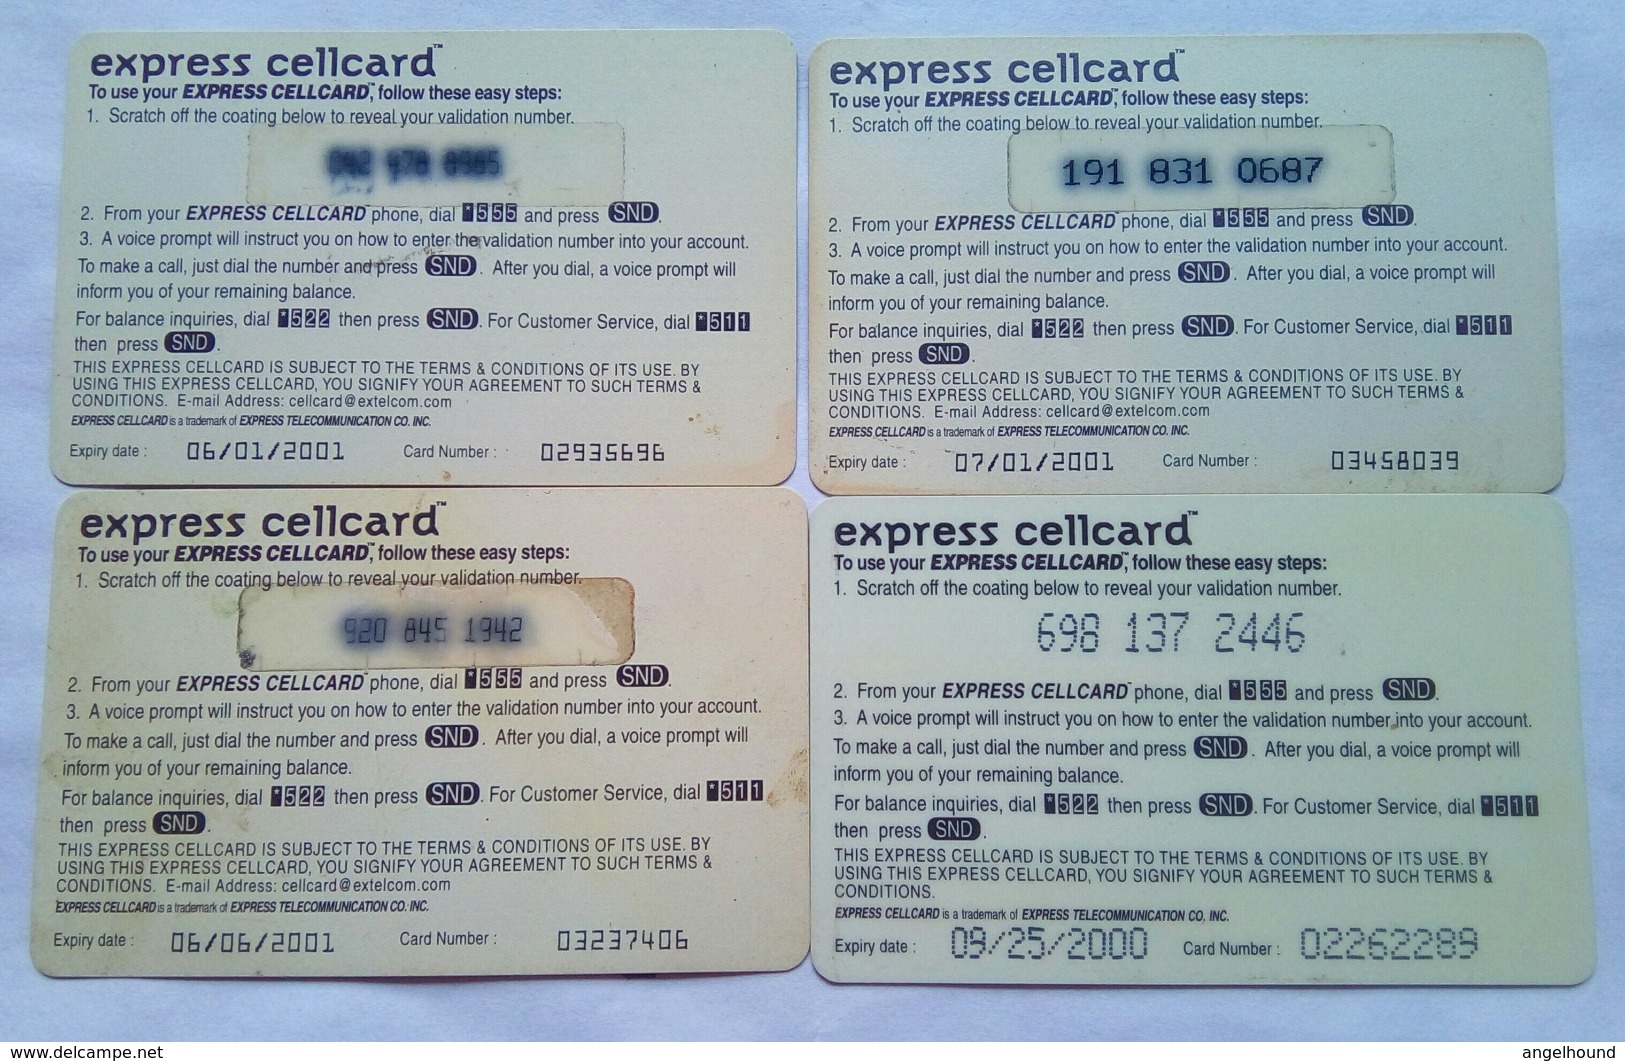 Express Telecom 4 Different - Philippines